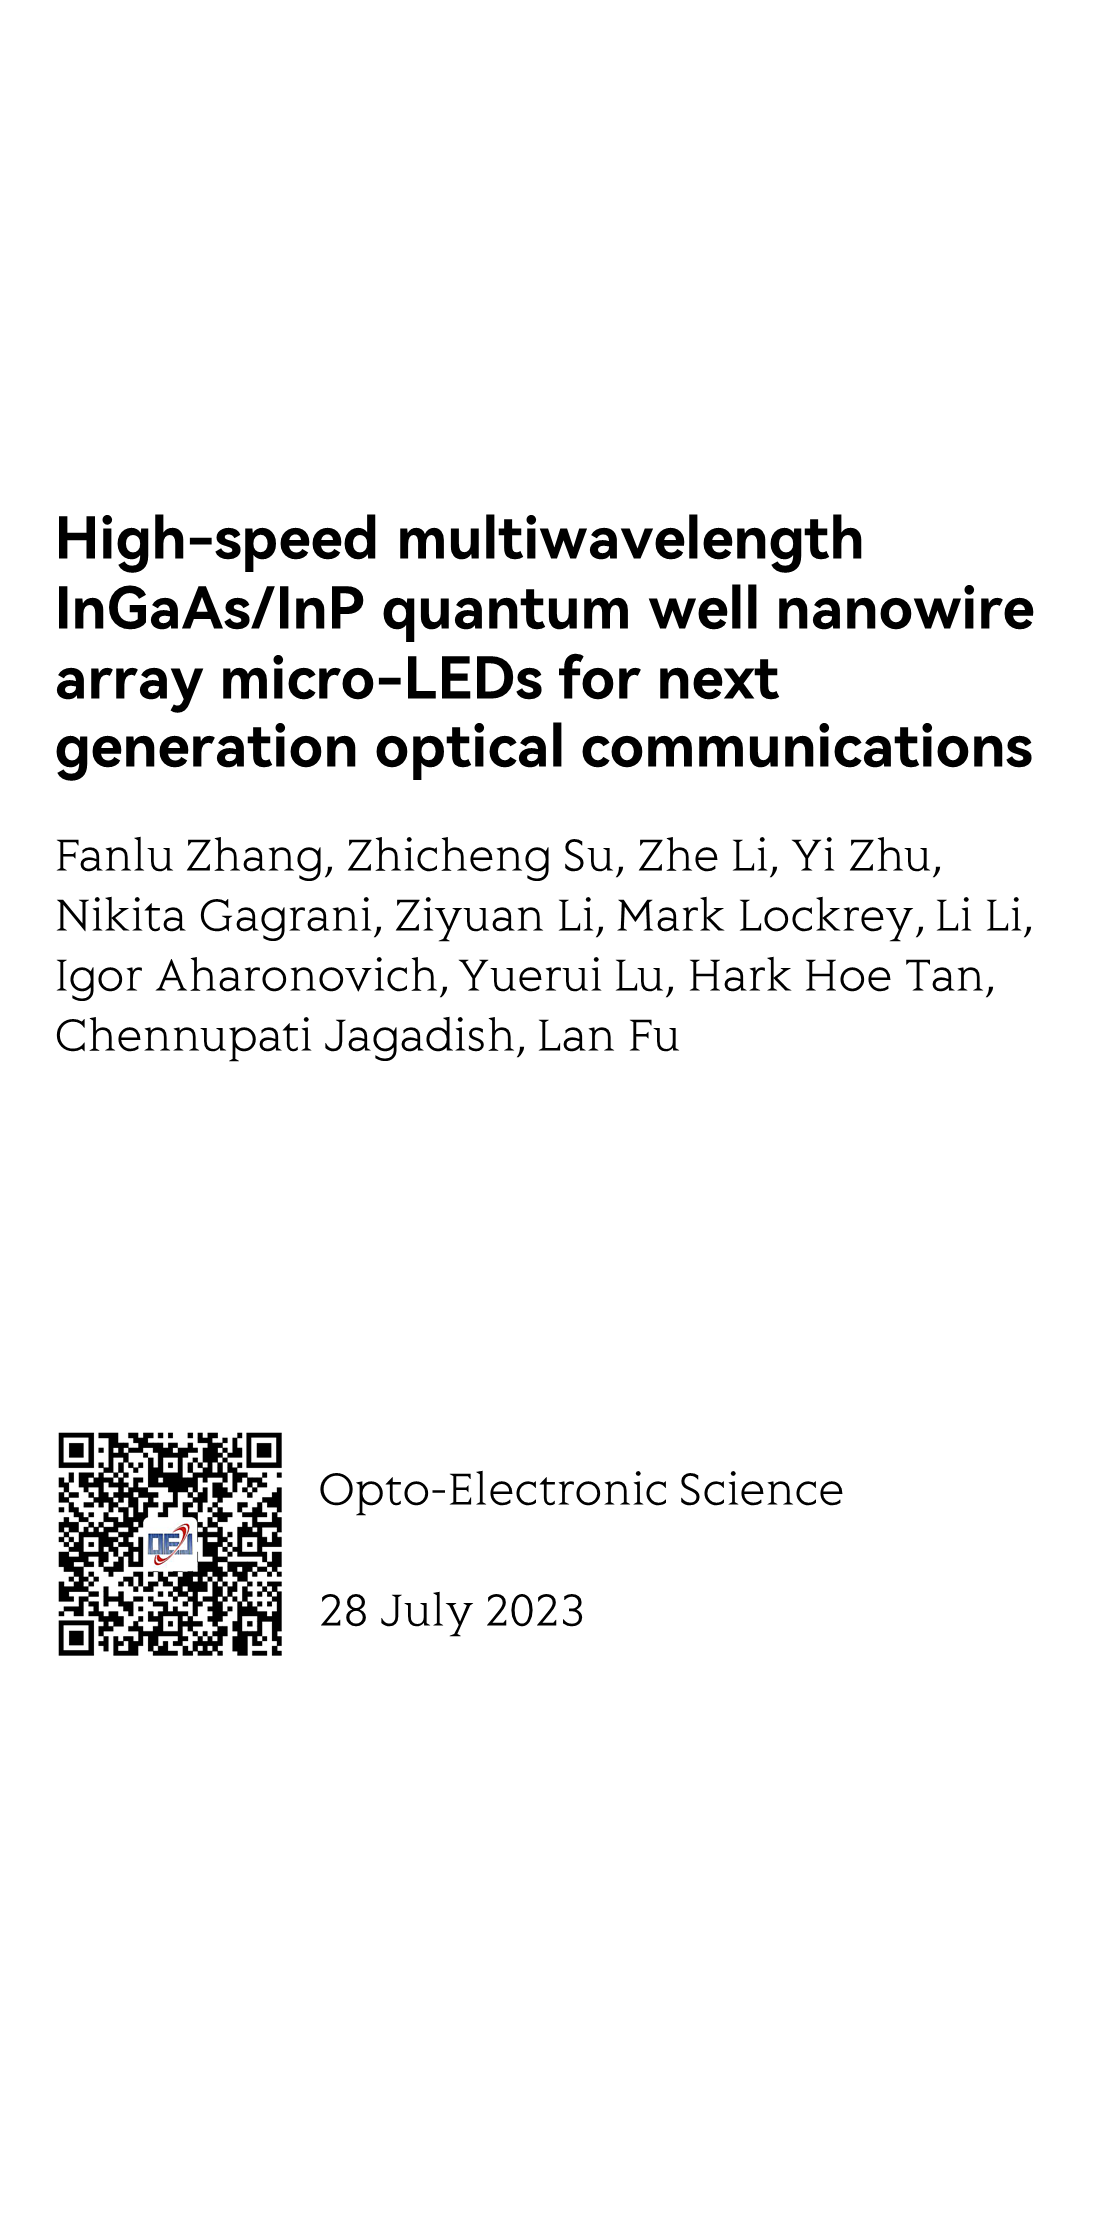 High-speed multiwavelength InGaAs/InP quantum well nanowire array micro-LEDs for next generation optical communications_1